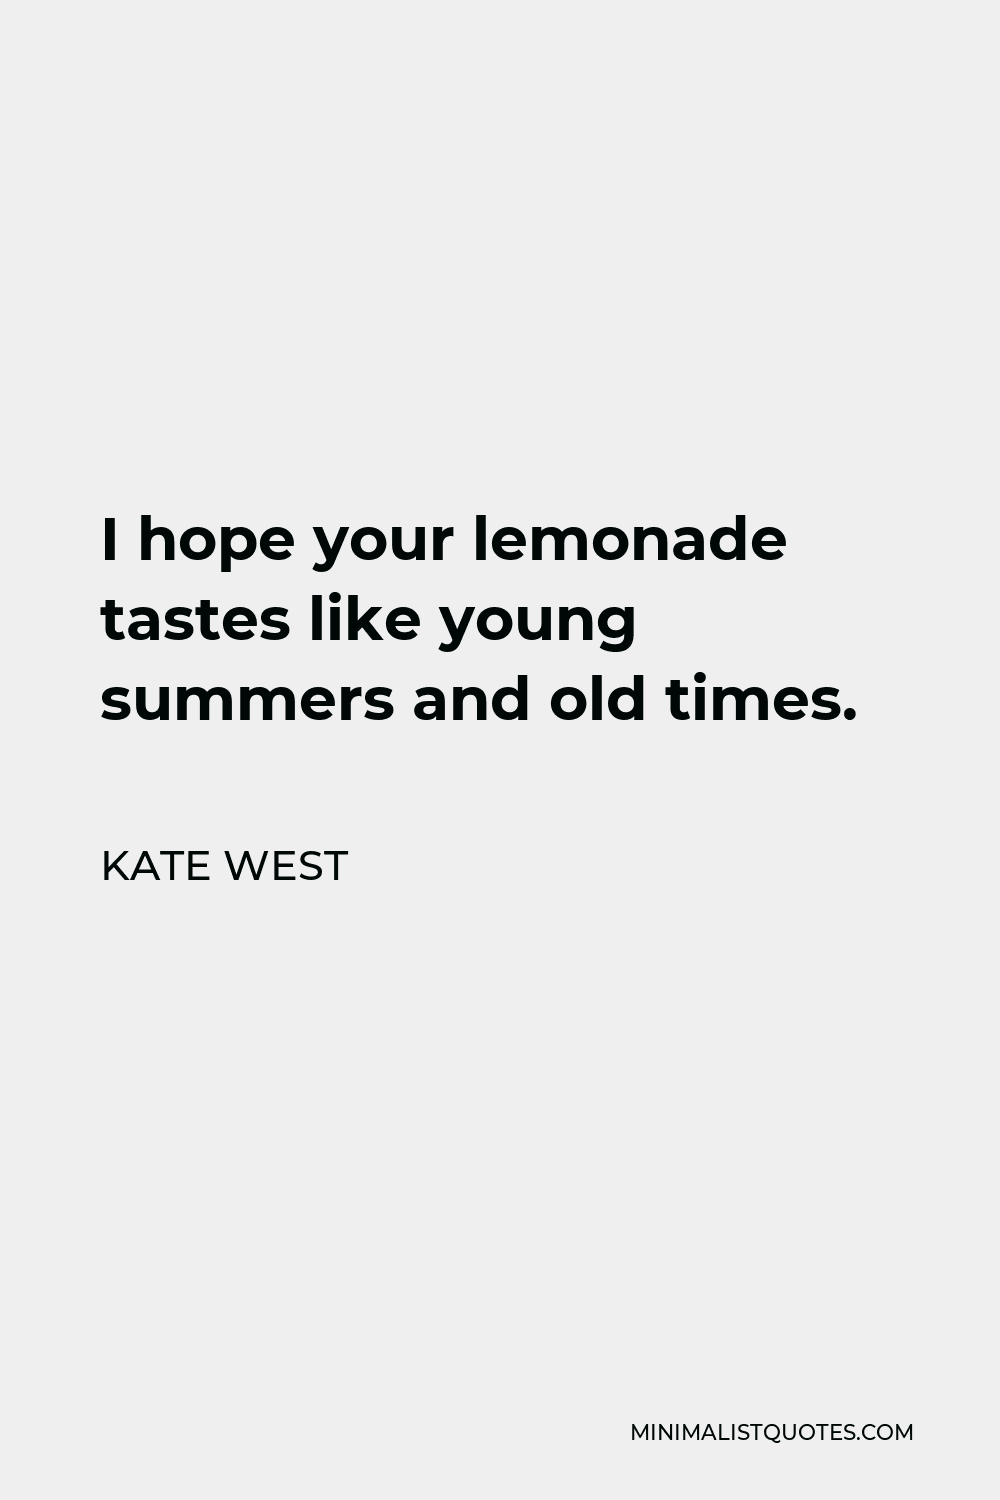 Kate West Quote - I hope your lemonade tastes like young summers and old times.